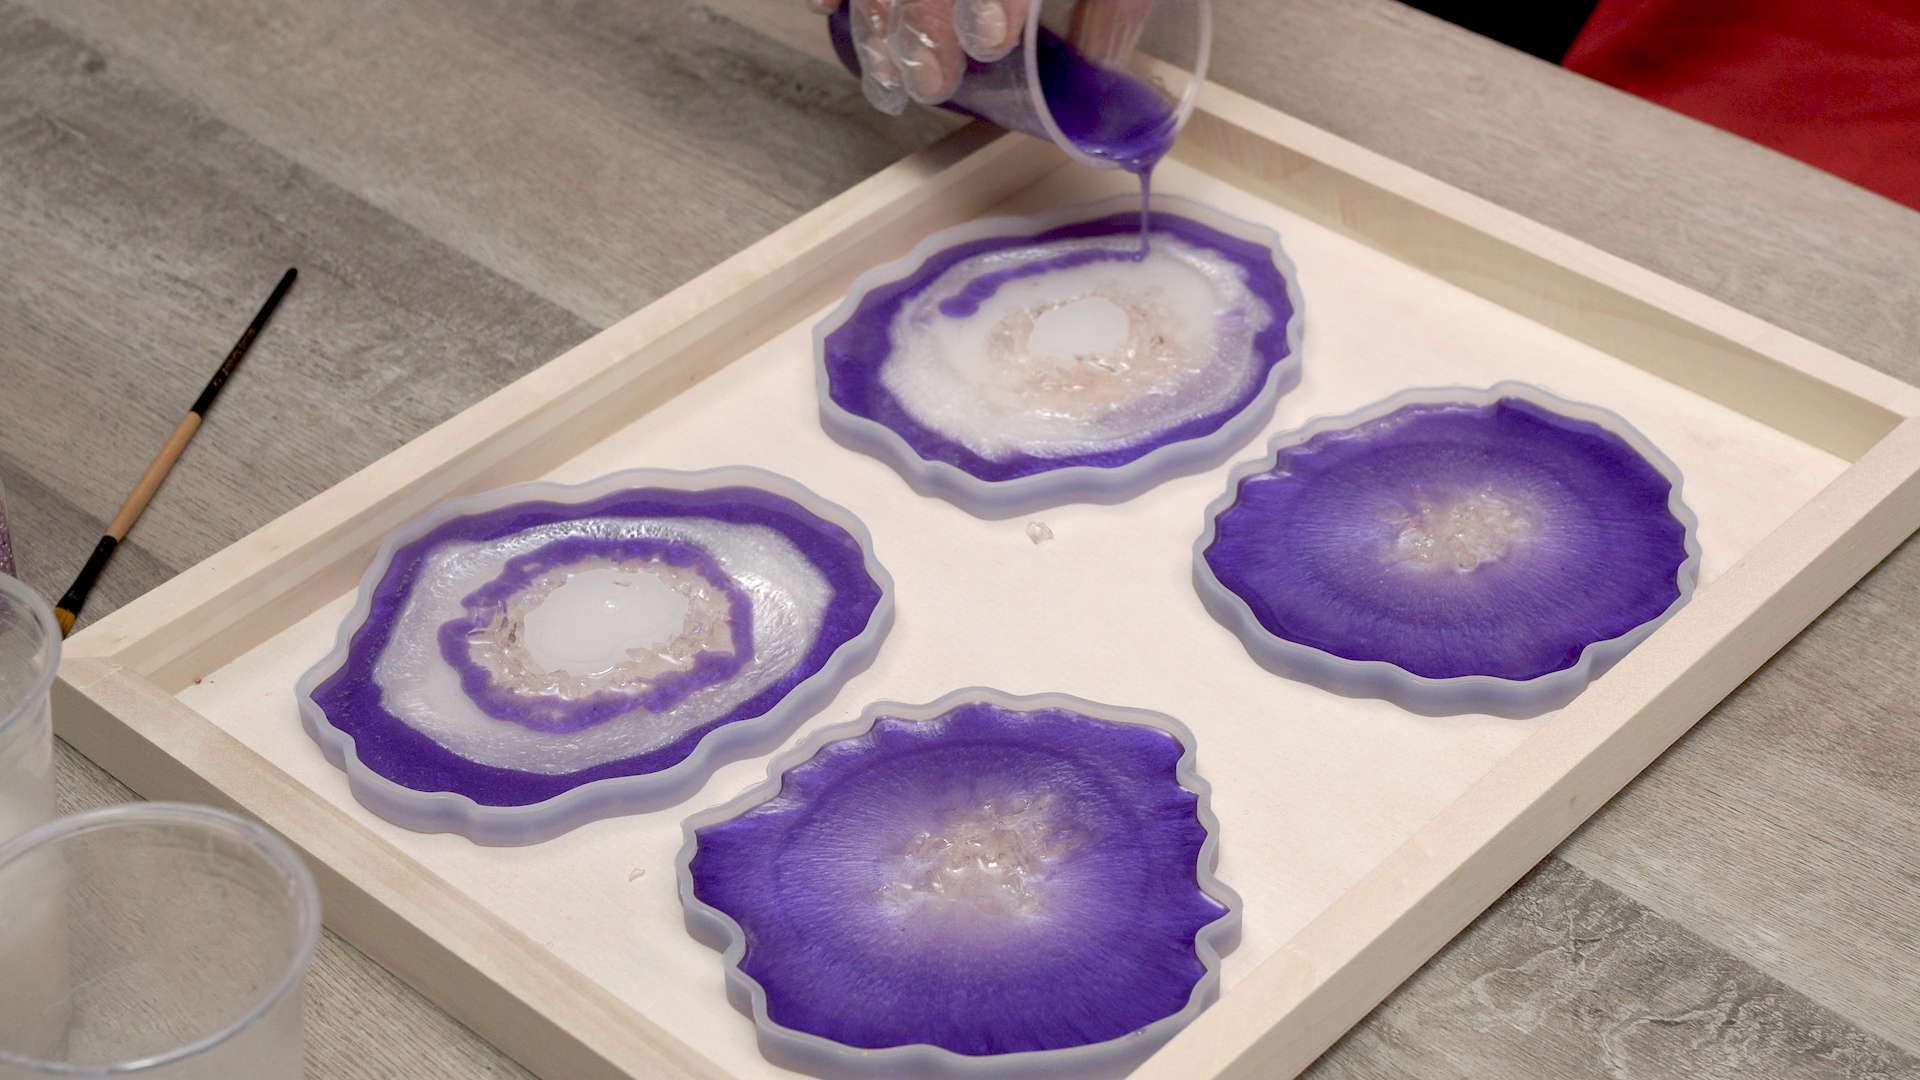 additional layers of purple and pearl added to center-cut out molds